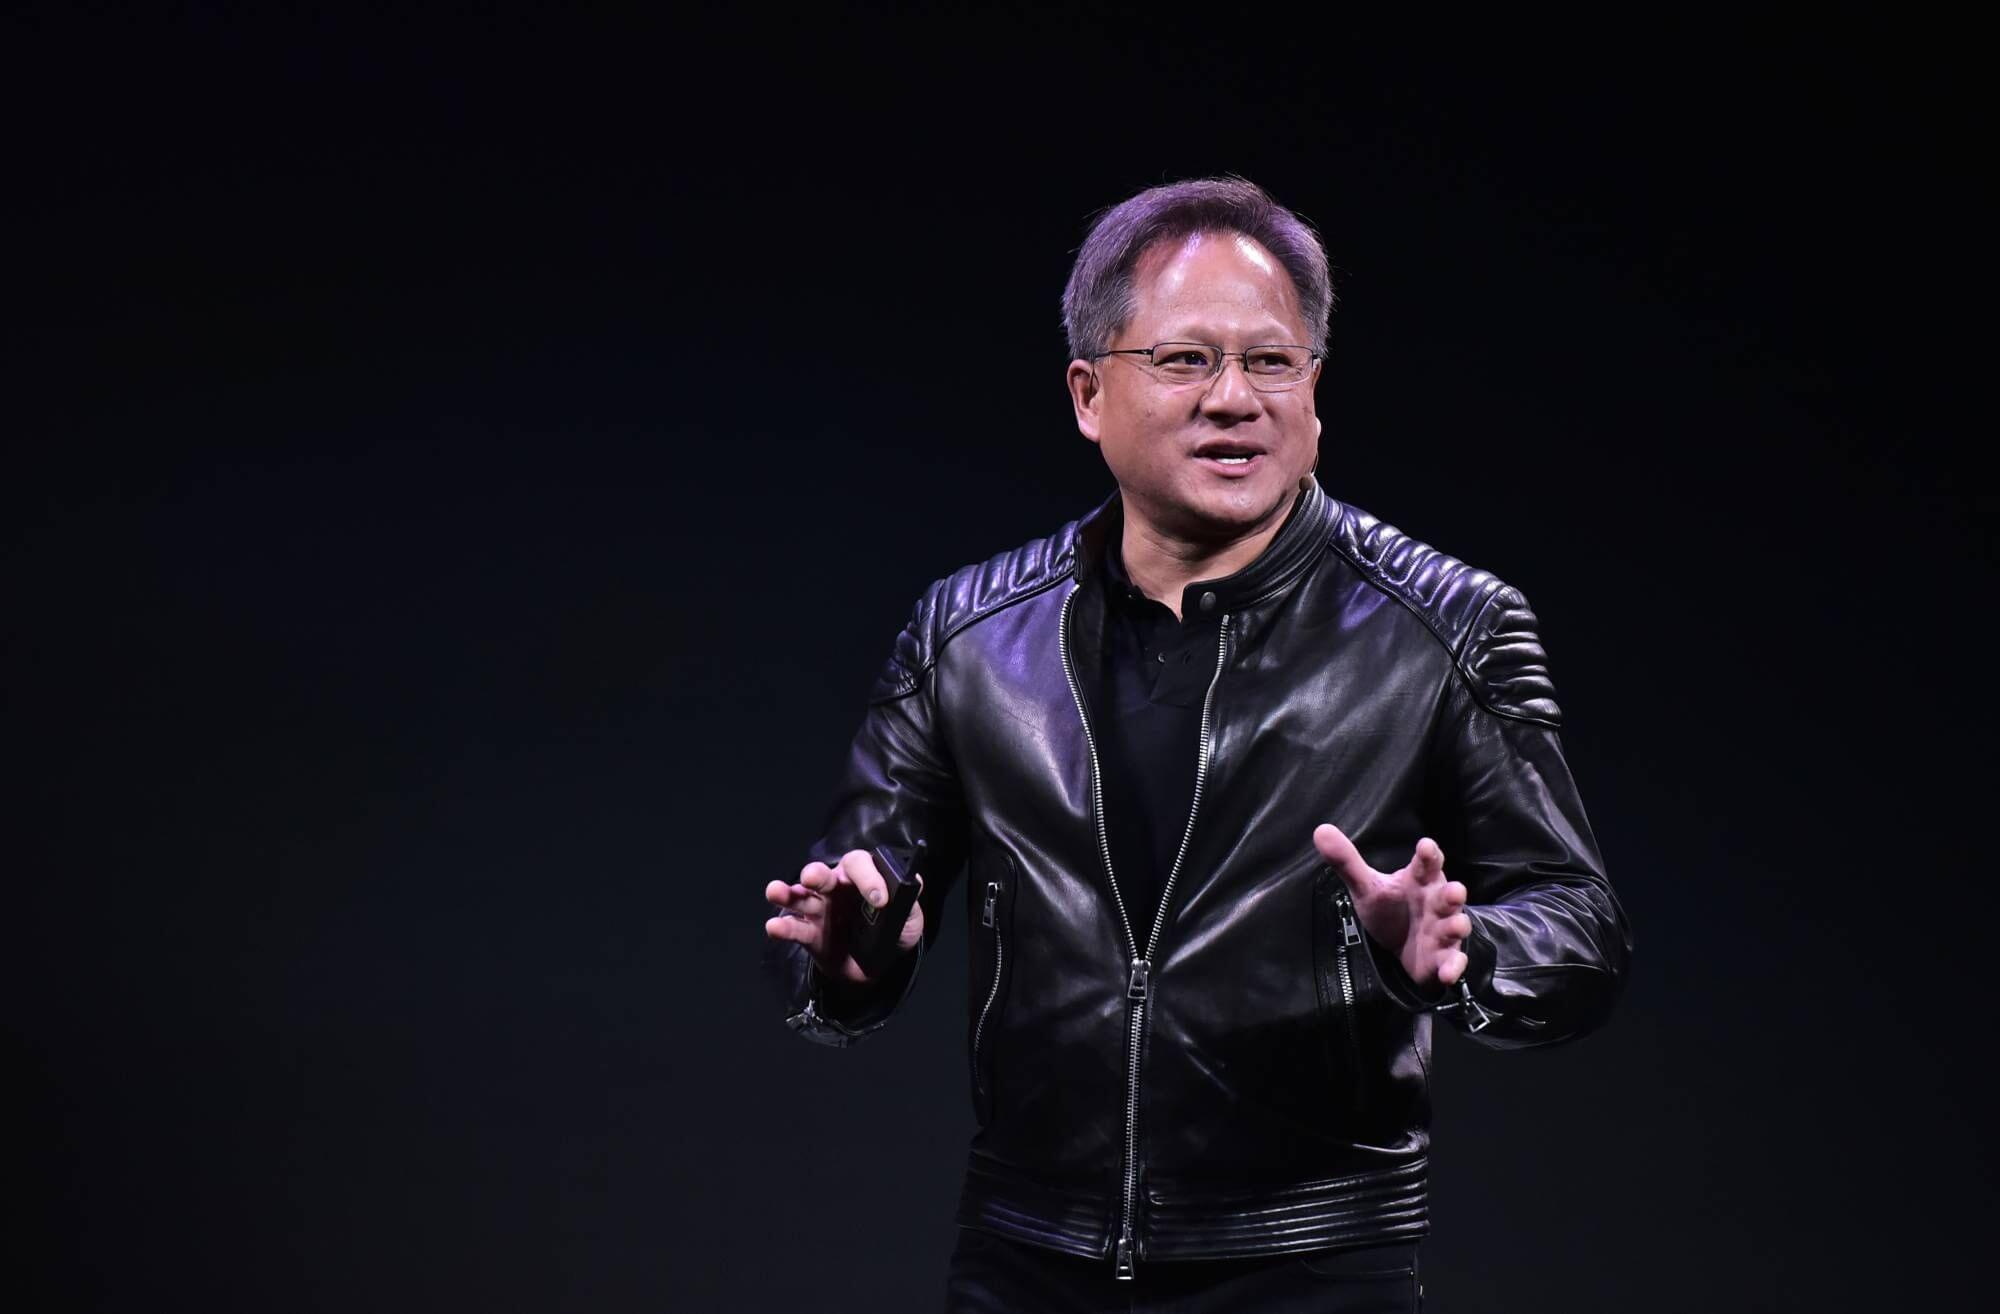 Nvidia is amped up for a big reveal on May 14